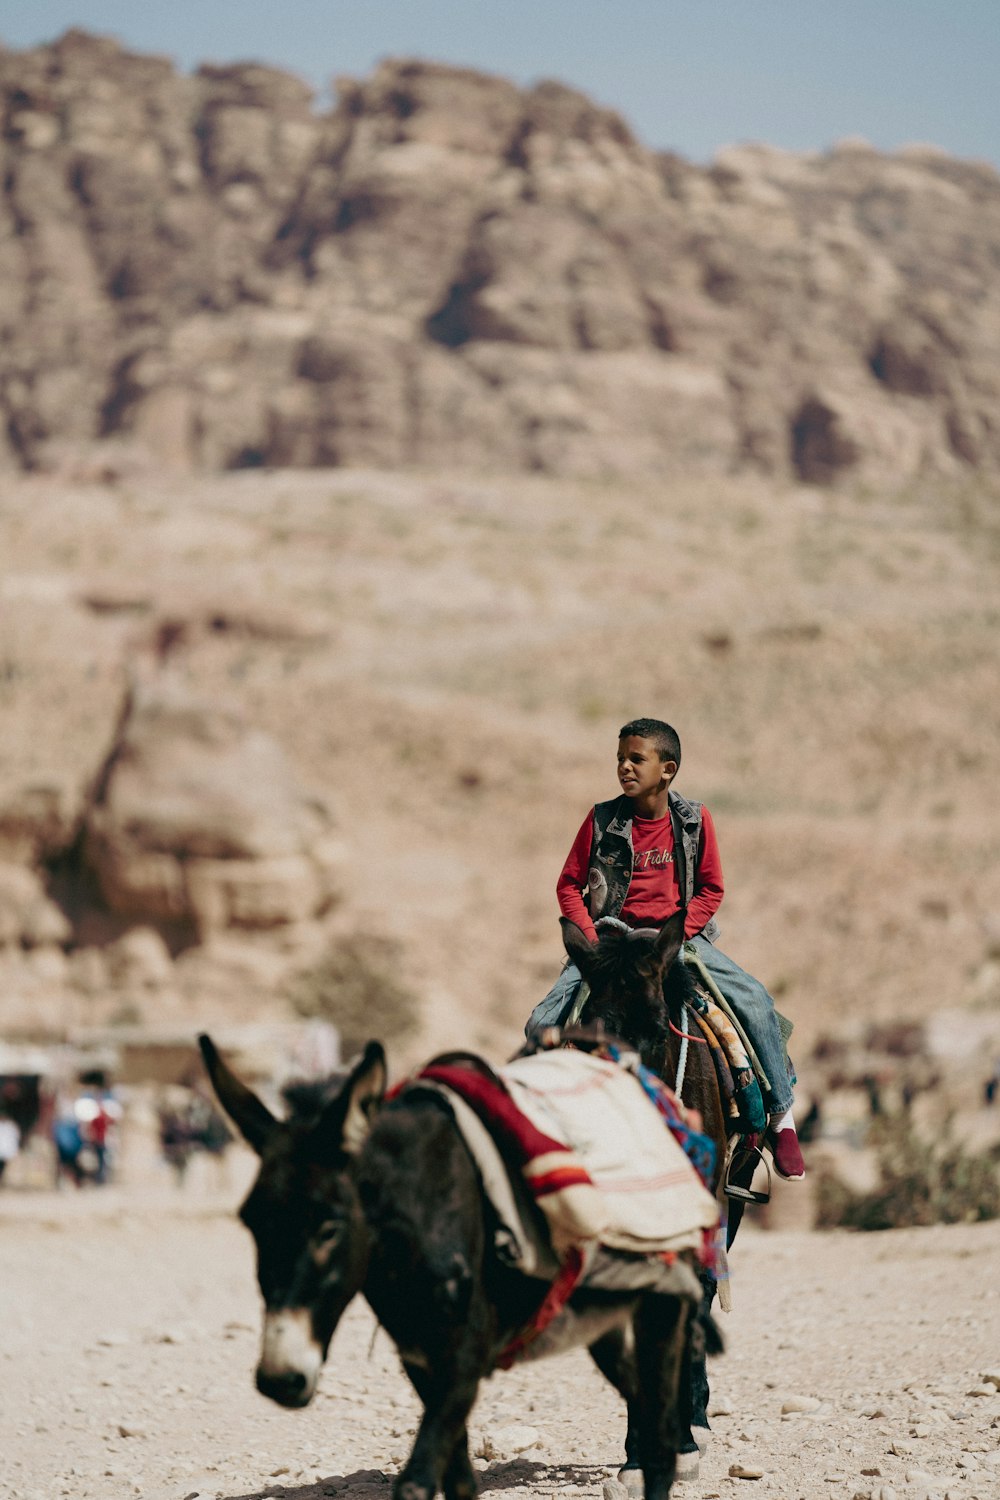 a young boy riding a donkey in the desert